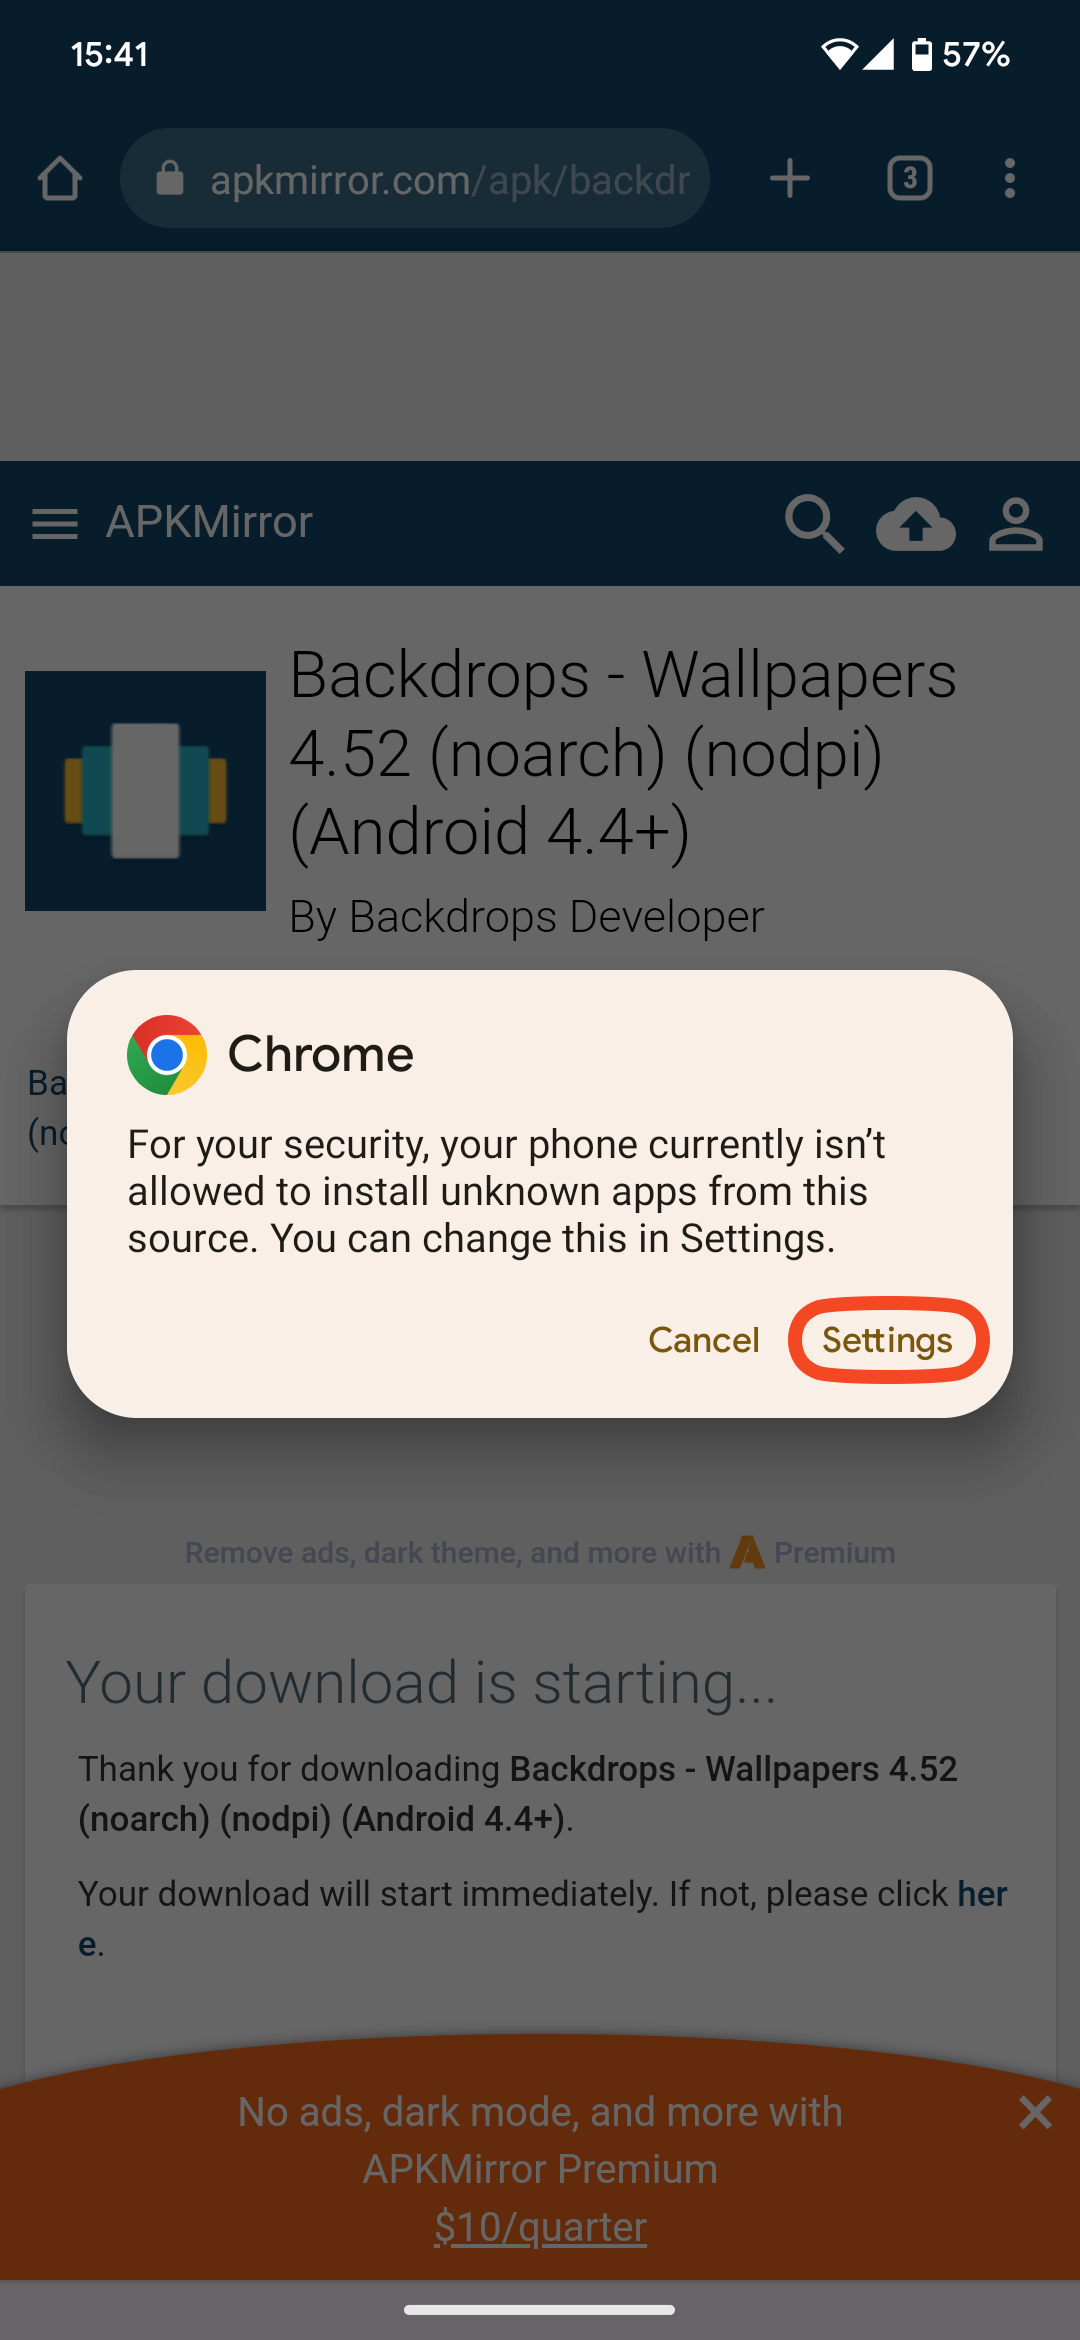 Screenshot of Chrome's security settings preventing app installation, with shortcut to Settings highlighted